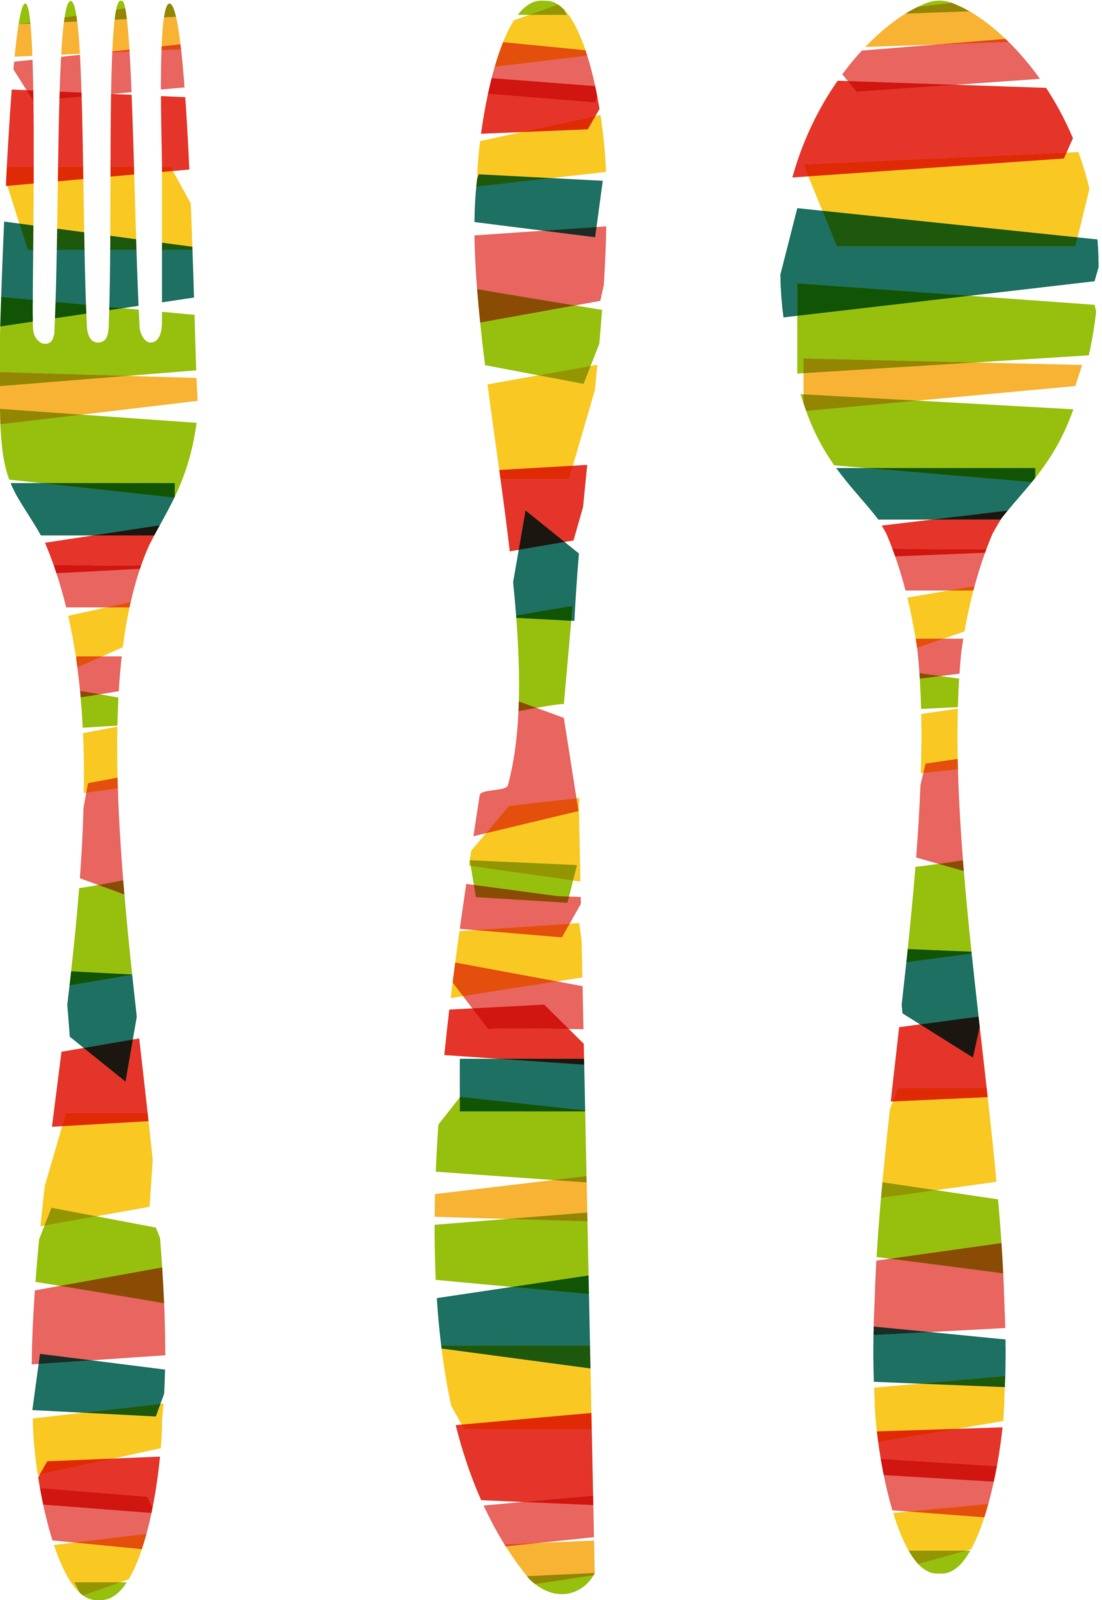 Cutlery shapes of stripes illustration by cienpies